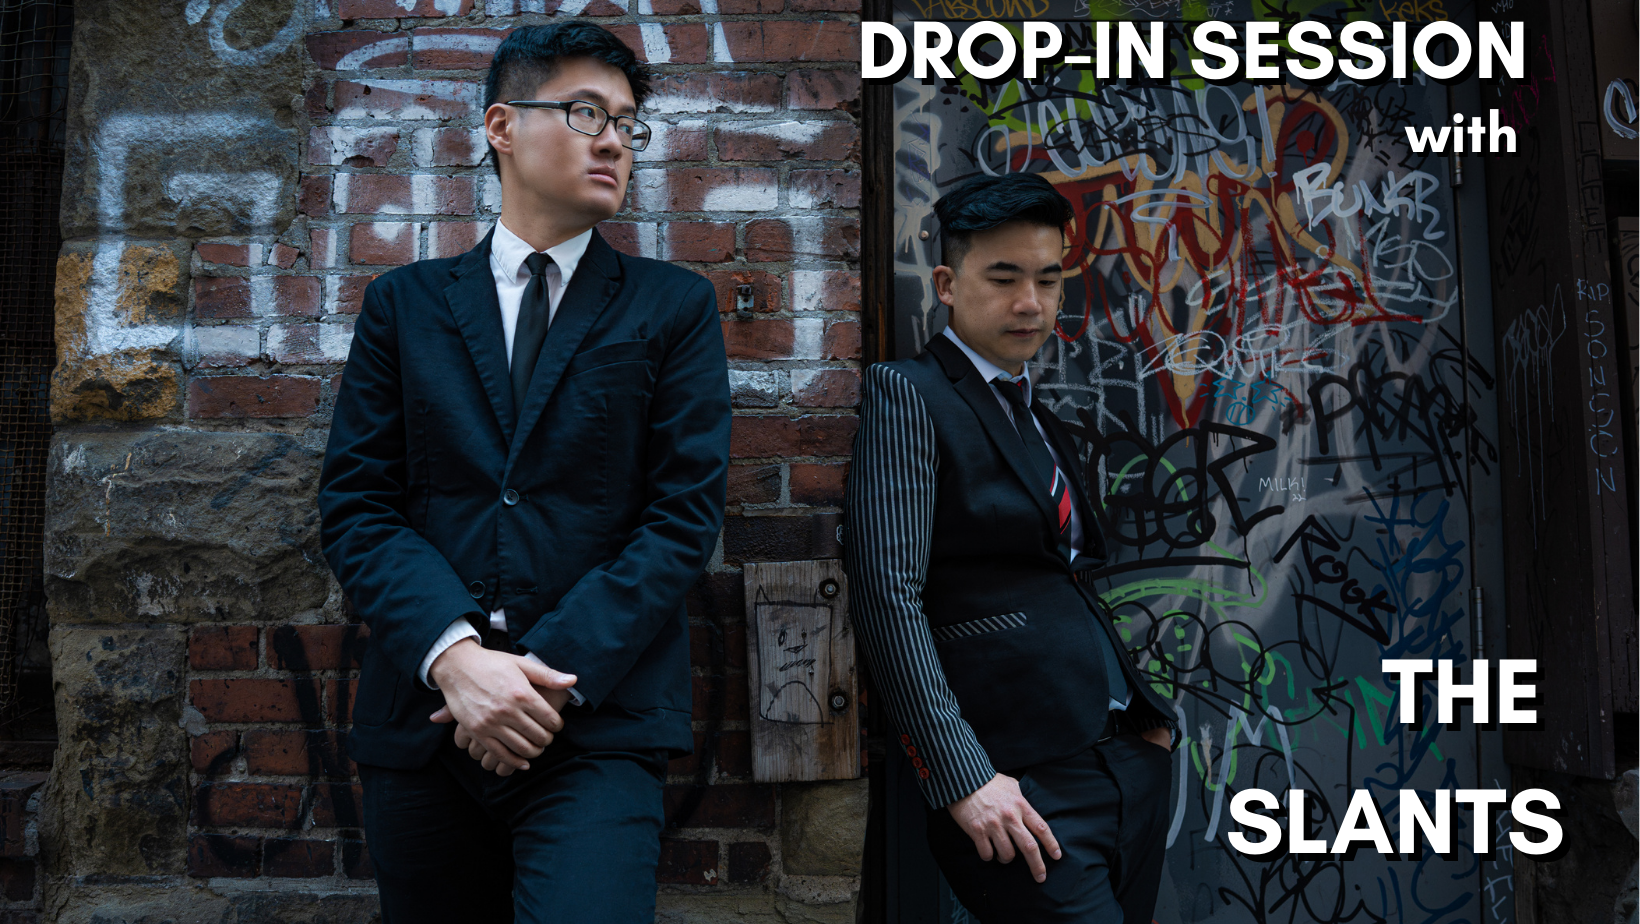 Drop-In Session with The Slants